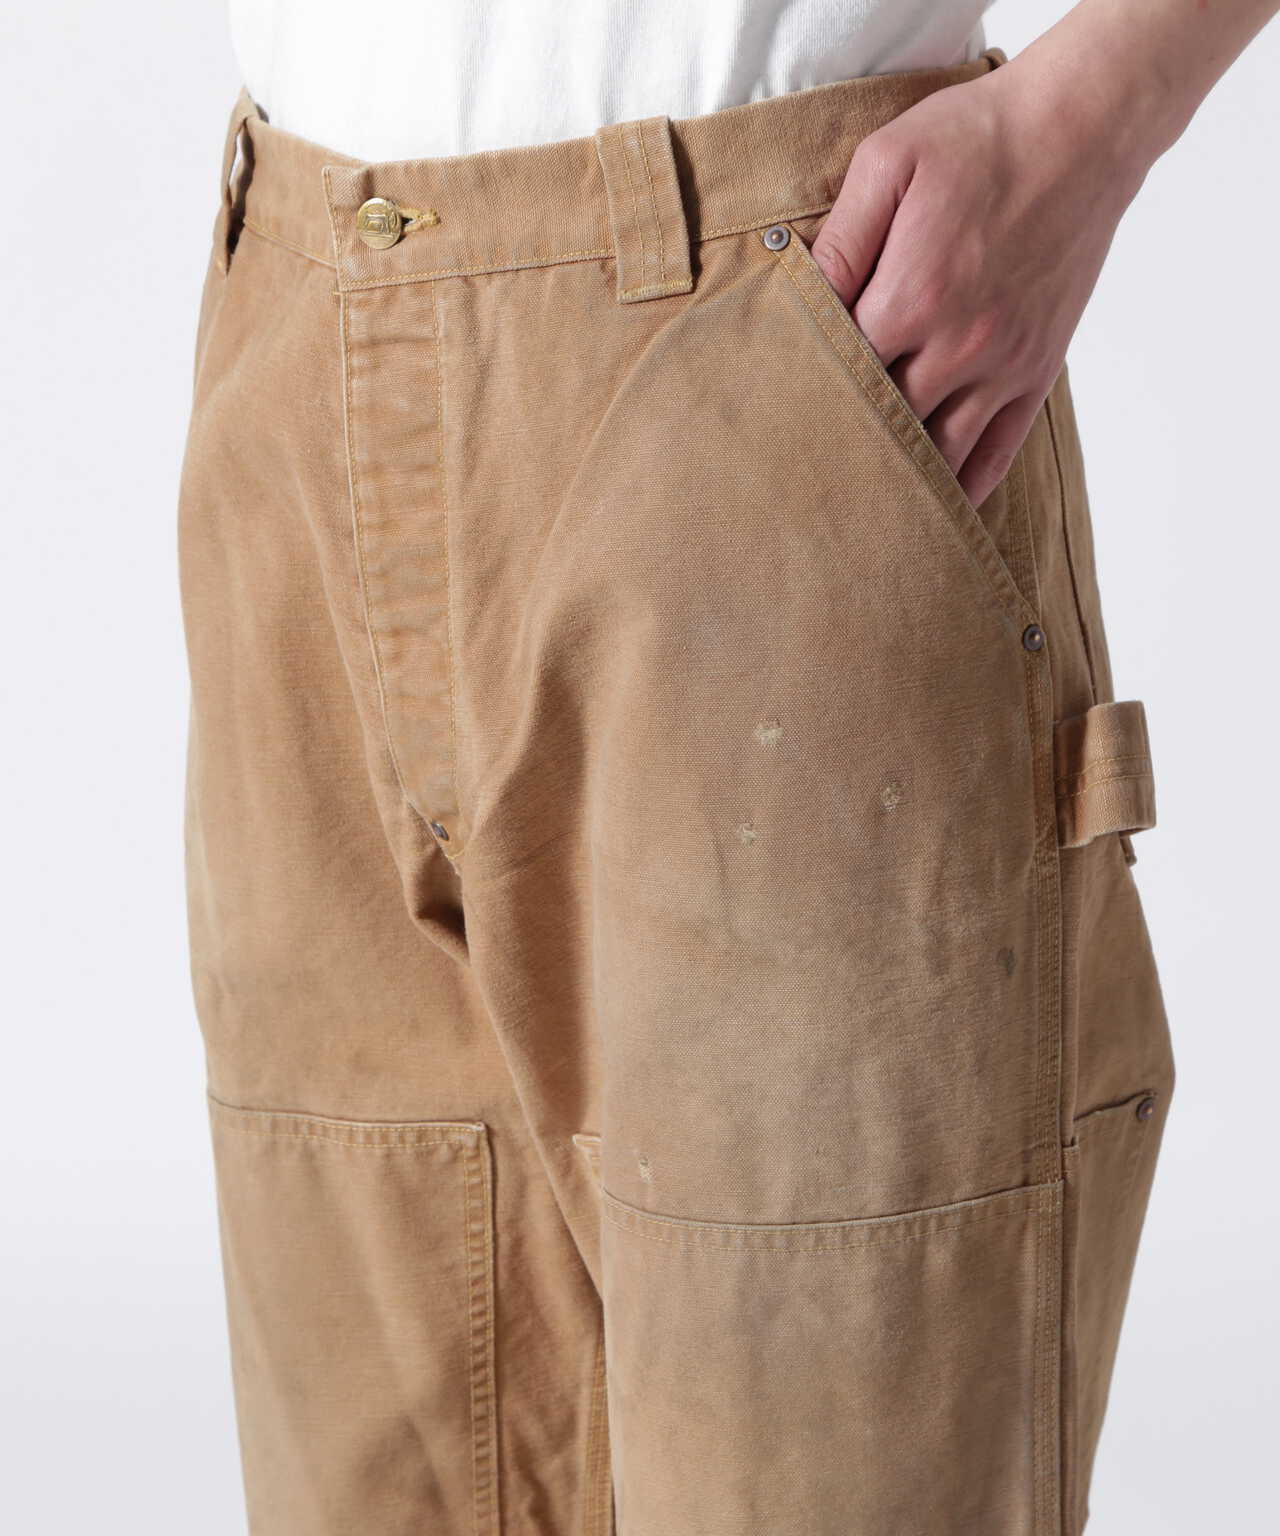 Carhartt Double Knee Pants Mens 42x32 Beige Tan Workwear Canvas Made in USA